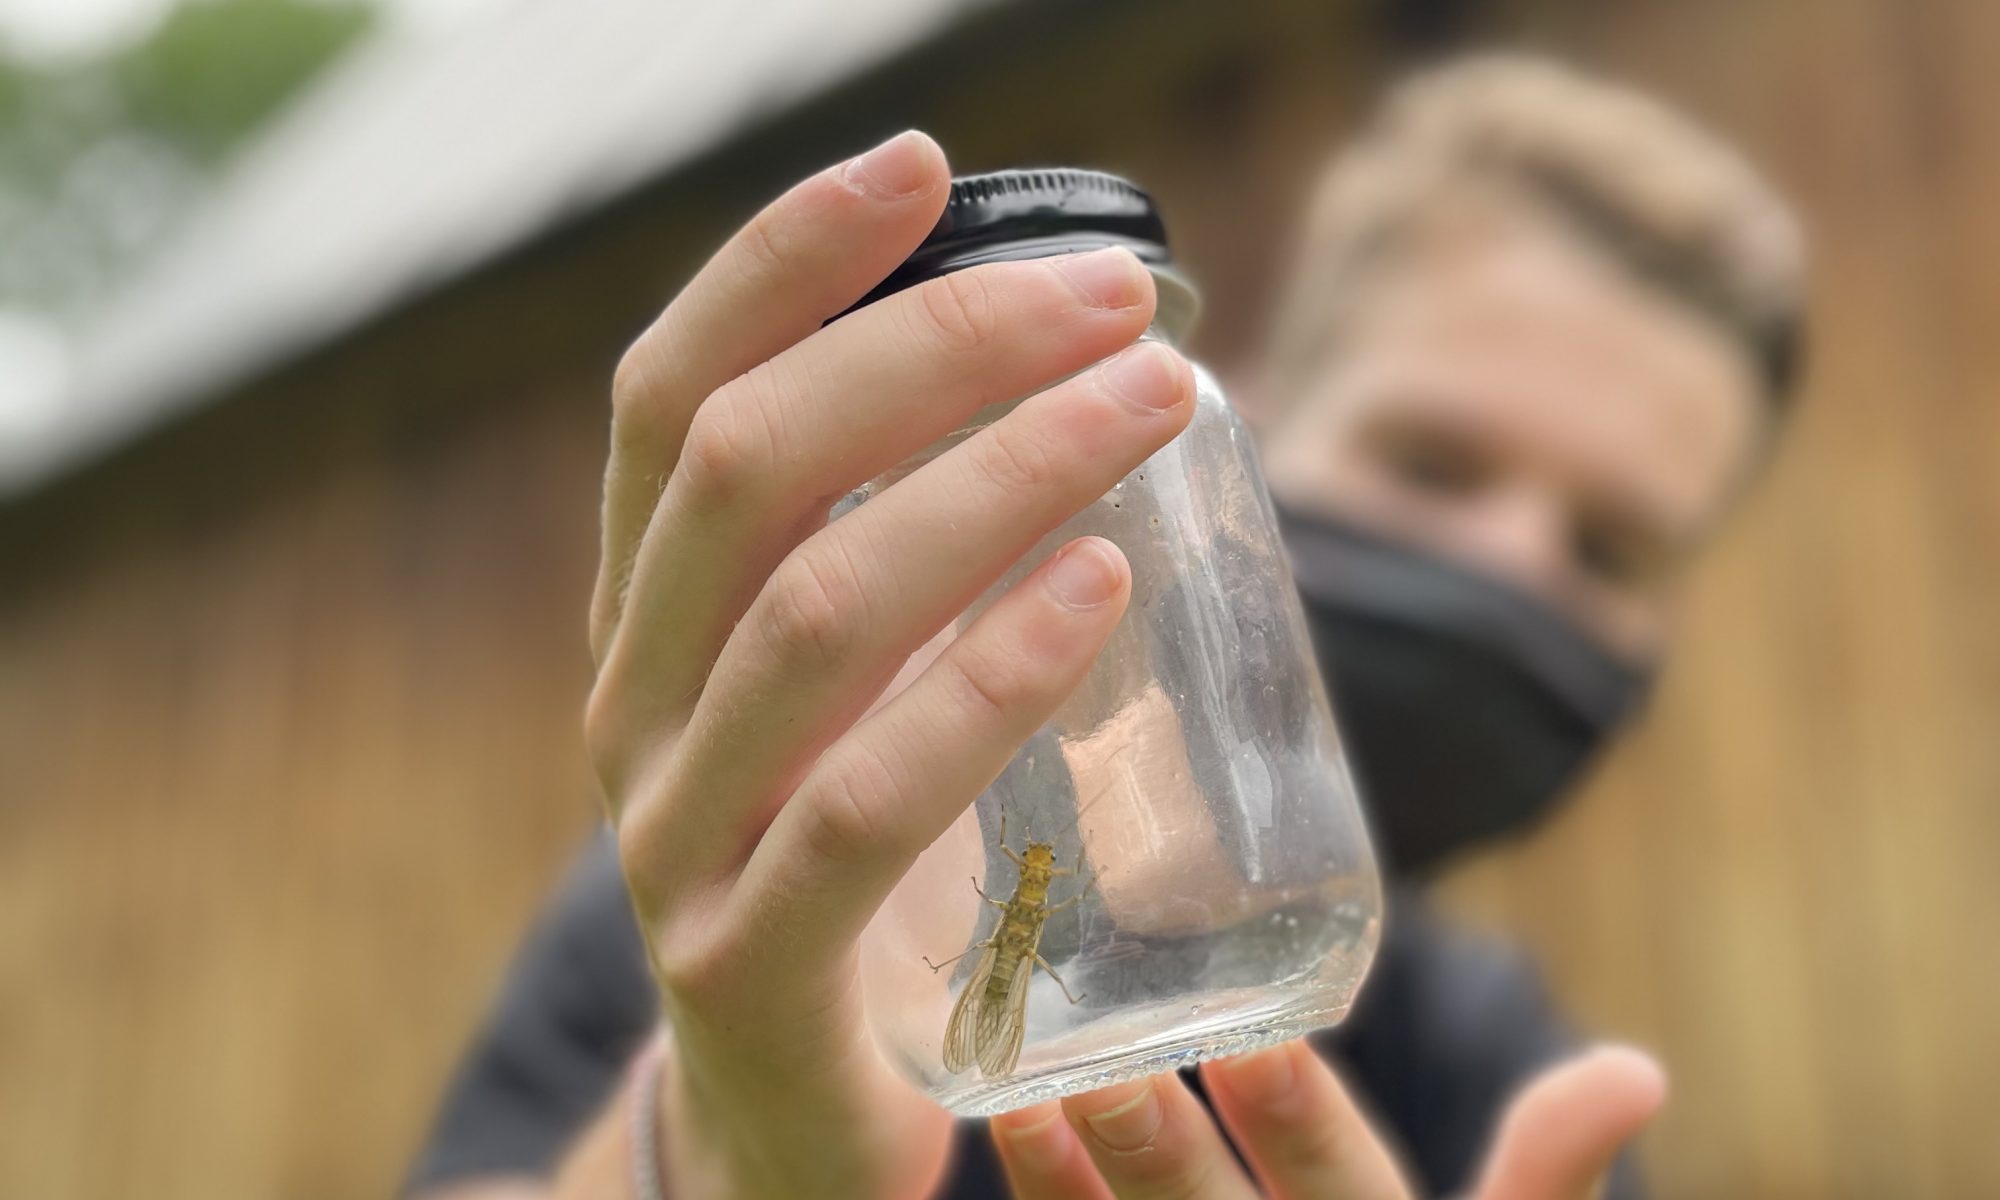 A stonefly in a glass jar is held toward the camera by a young white man